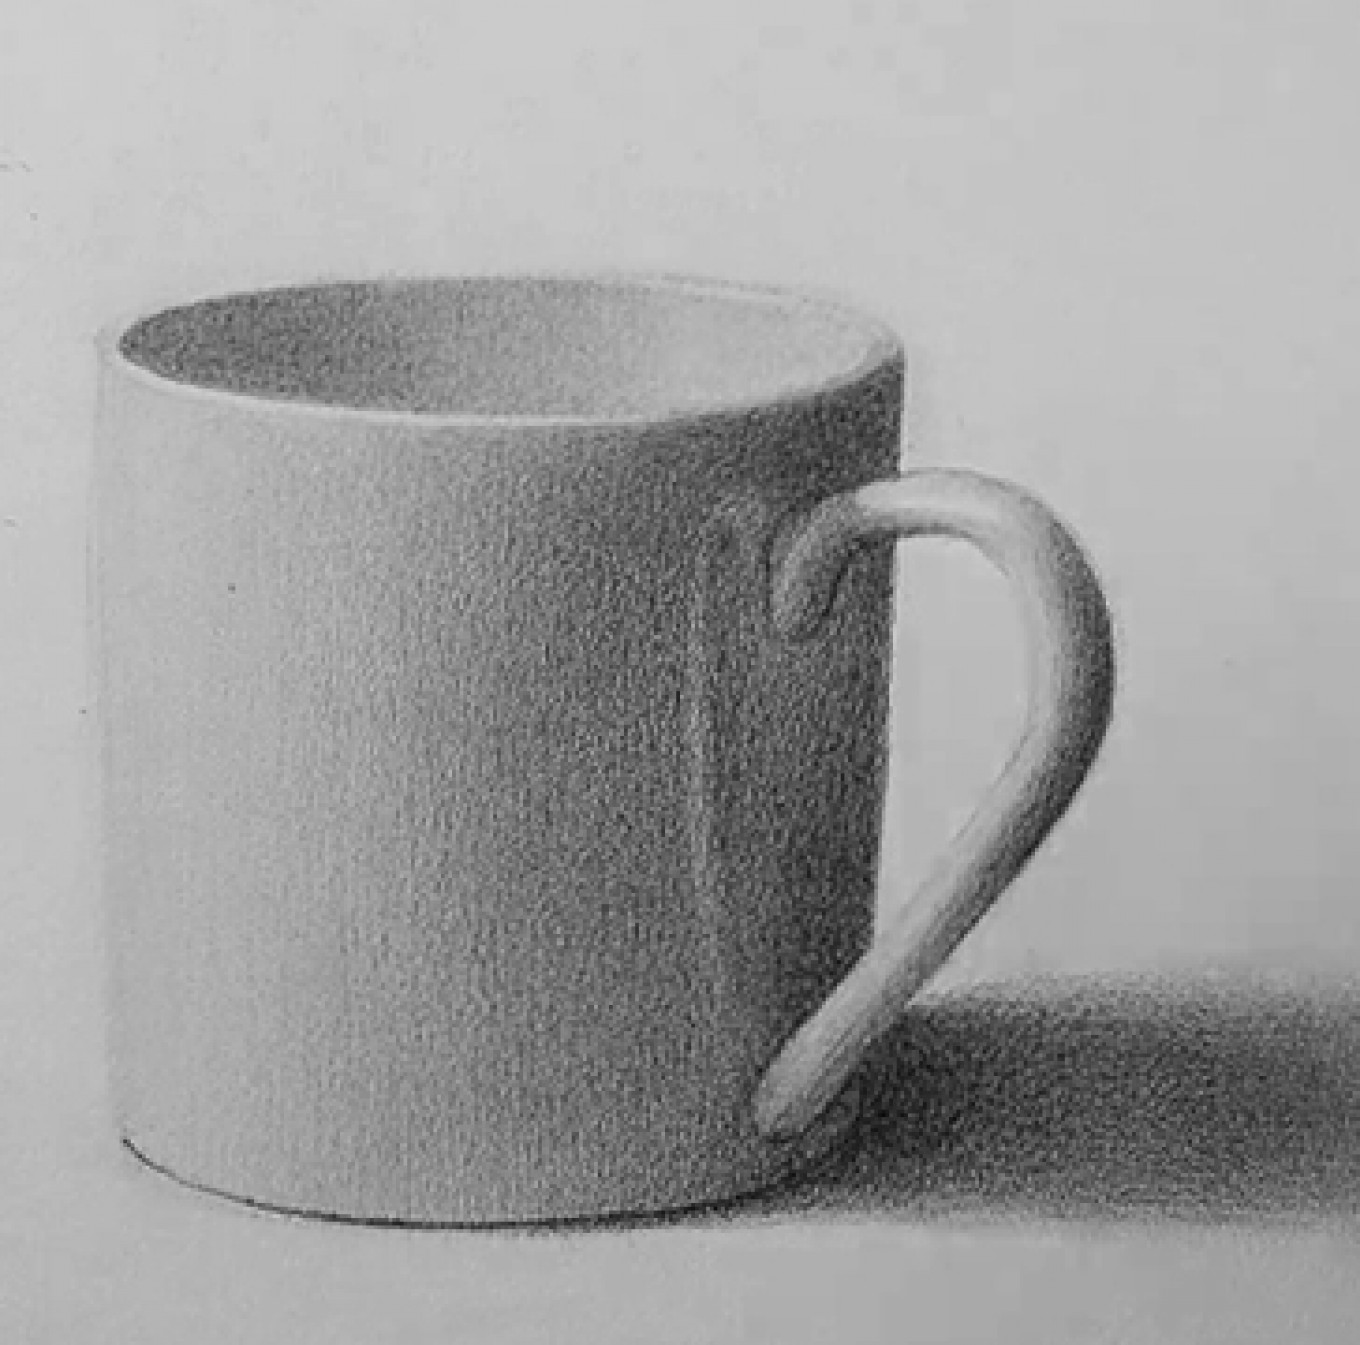 simple still life drawings in pencil